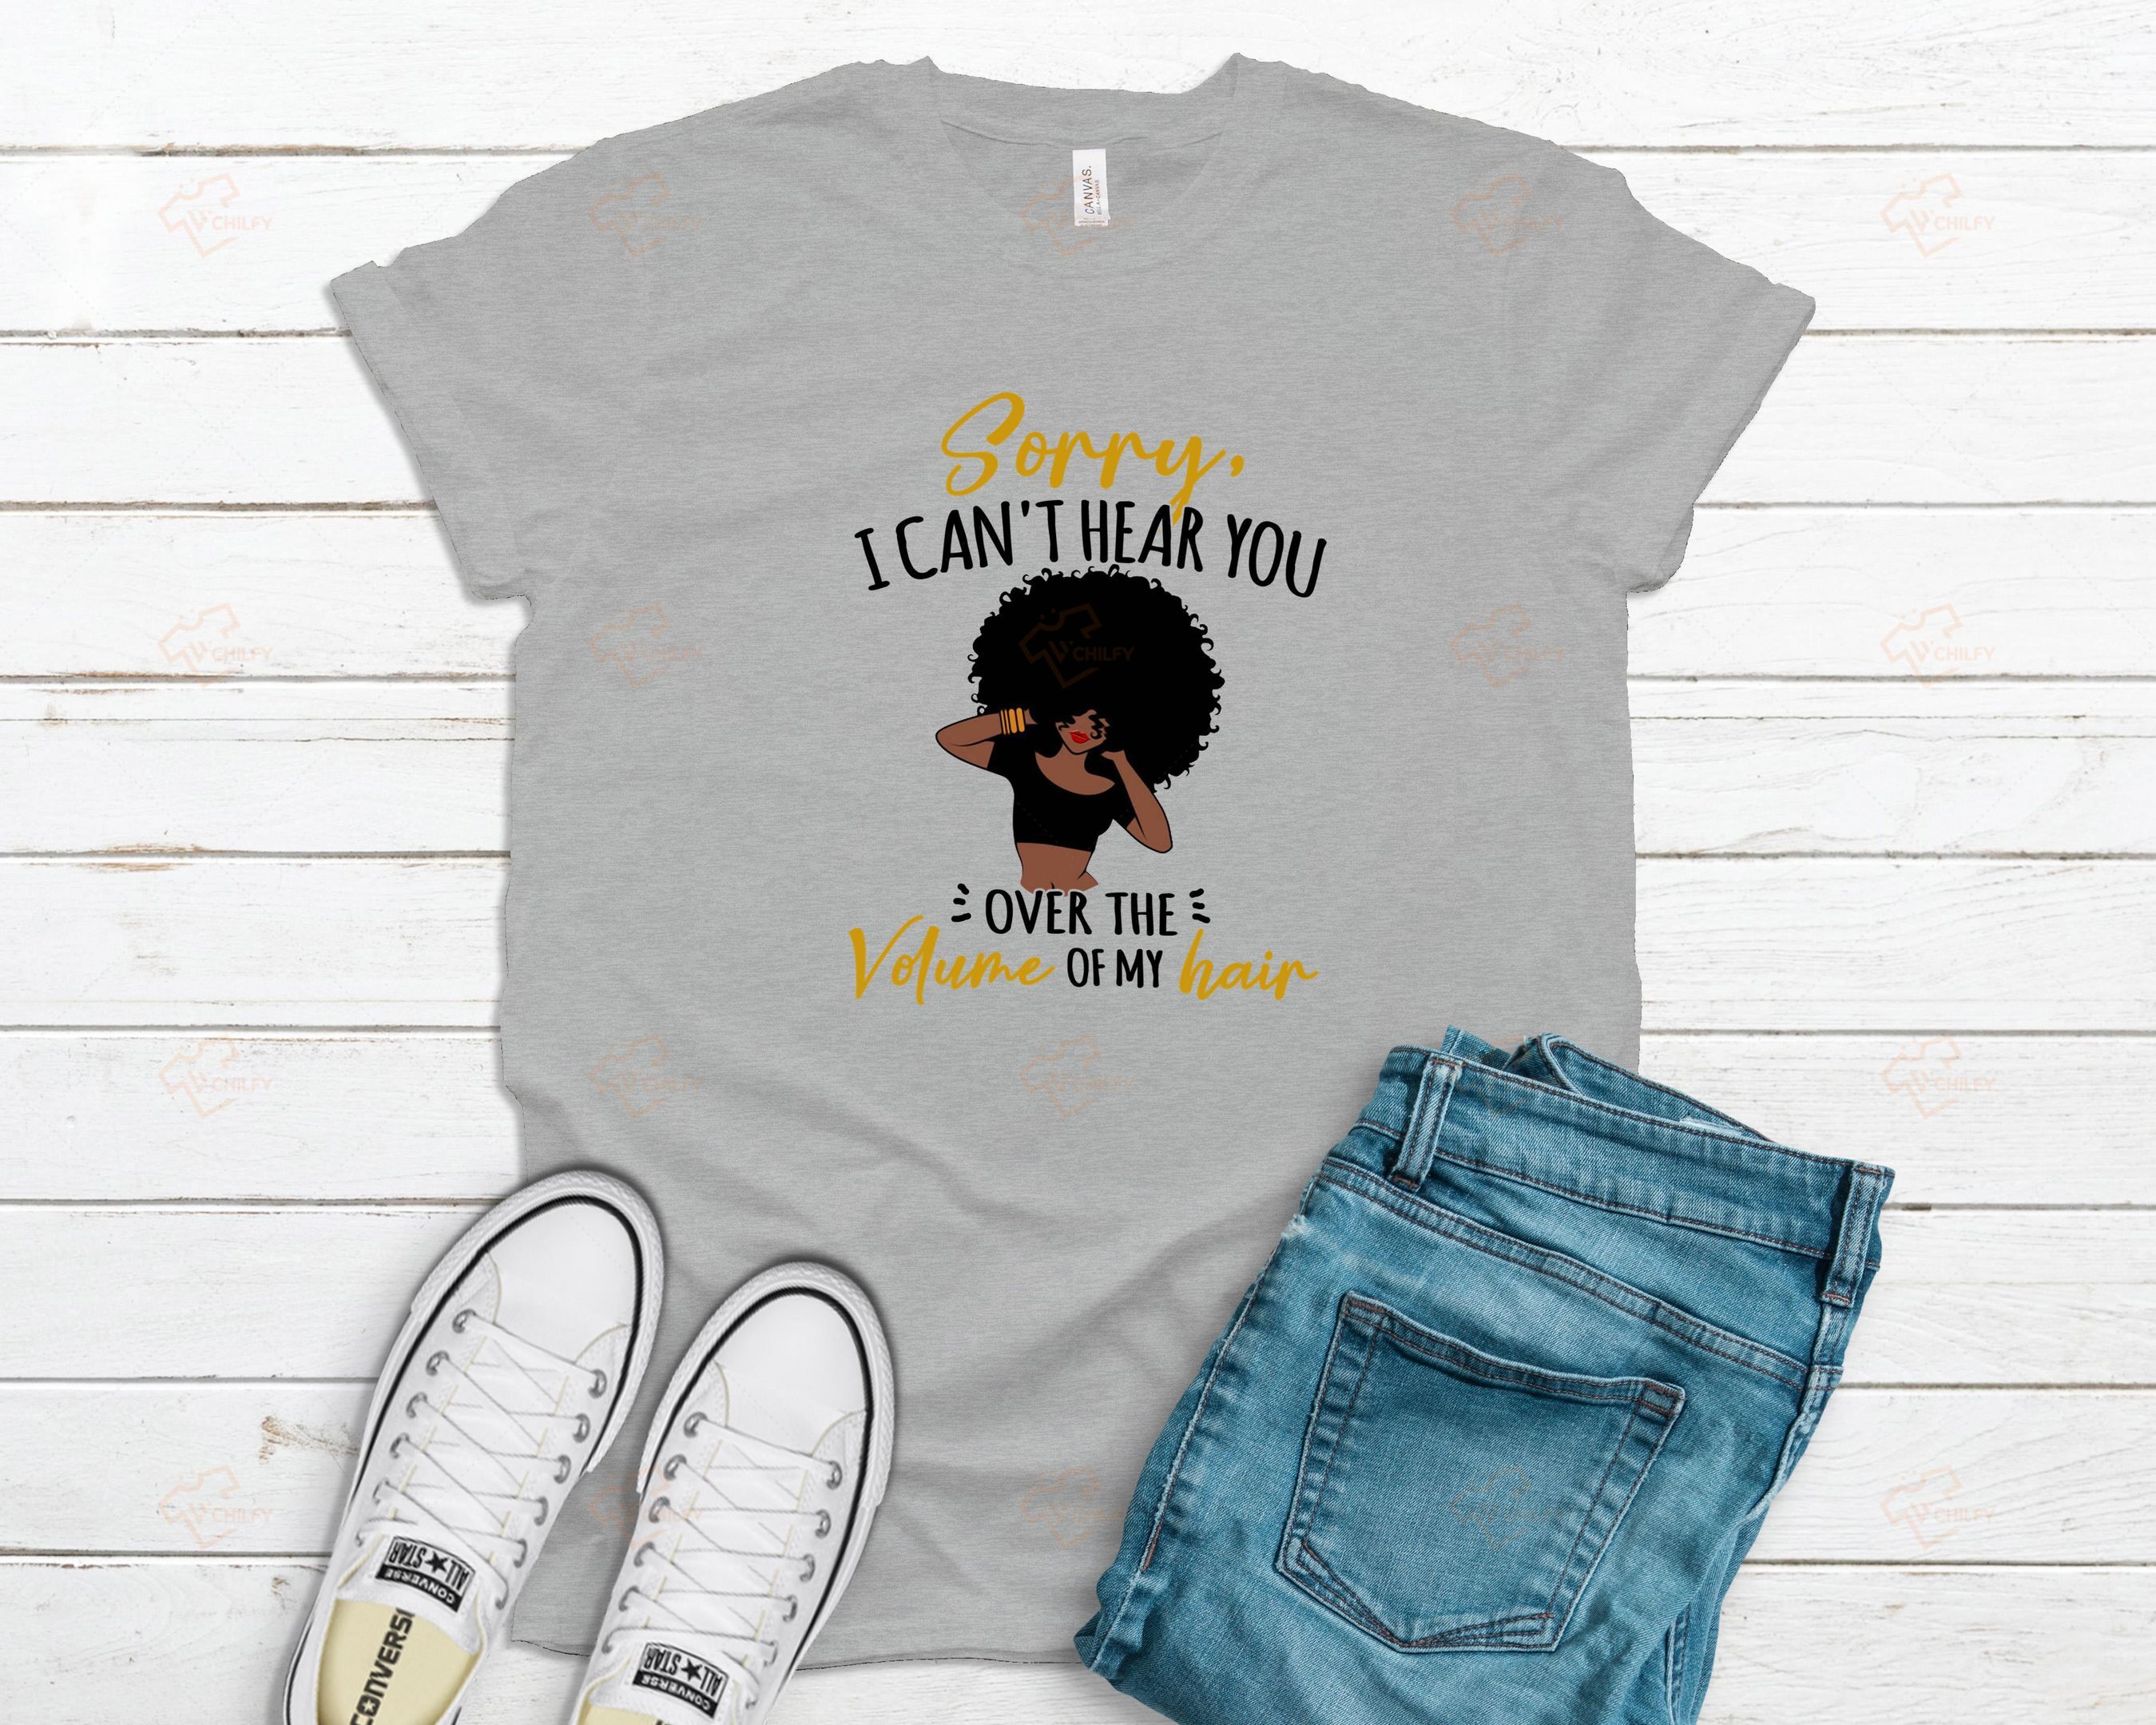 I can’t hear you over the volume of my hair shirt, afro girl shirt, black girl shirt